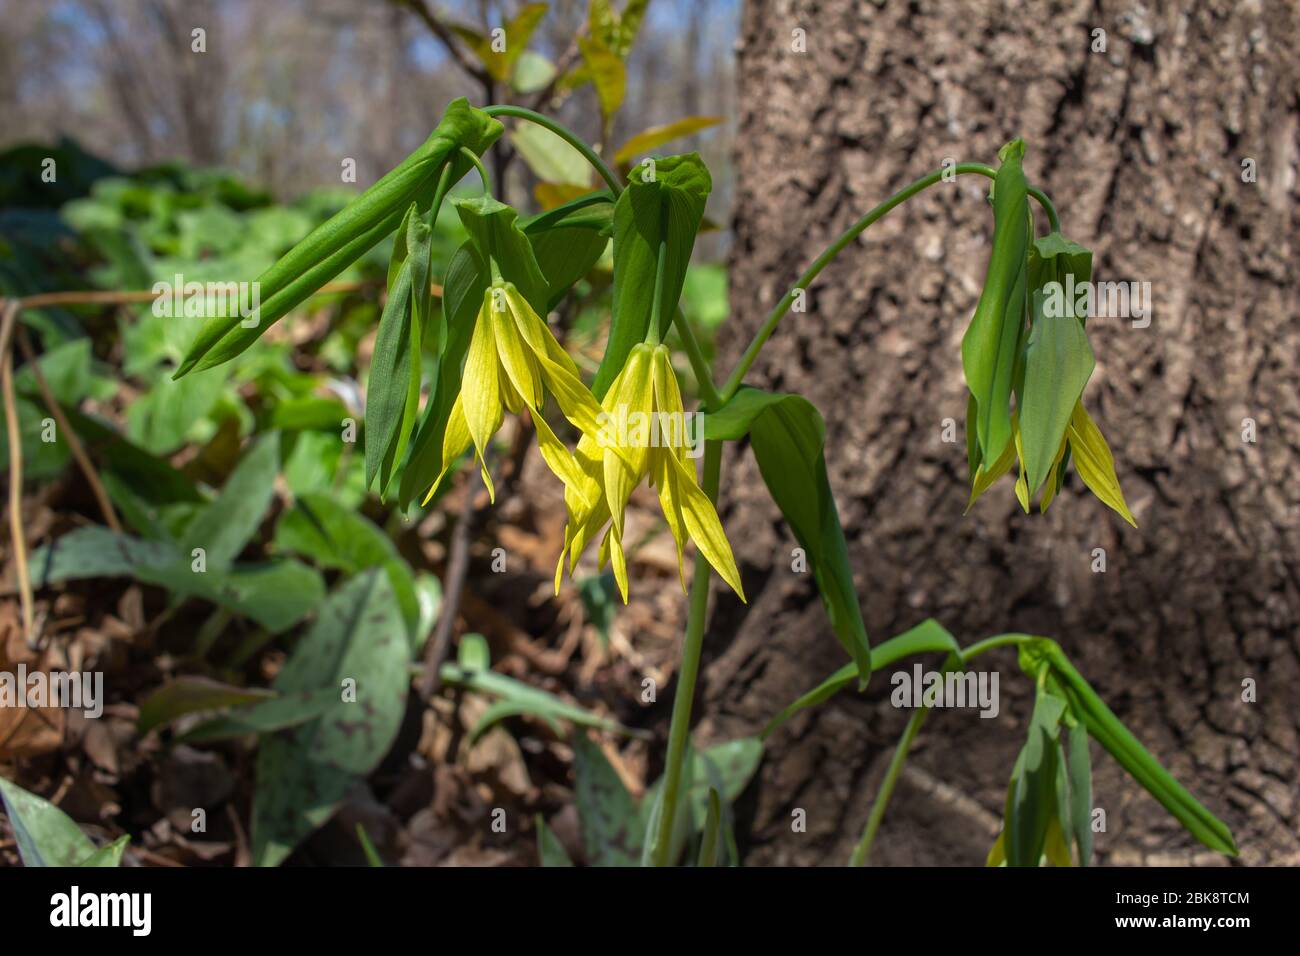 Close up view of fragile large-flowered yellow bellwort wildflowers with delicate twisted petals, growing in a woodland ravine Stock Photo